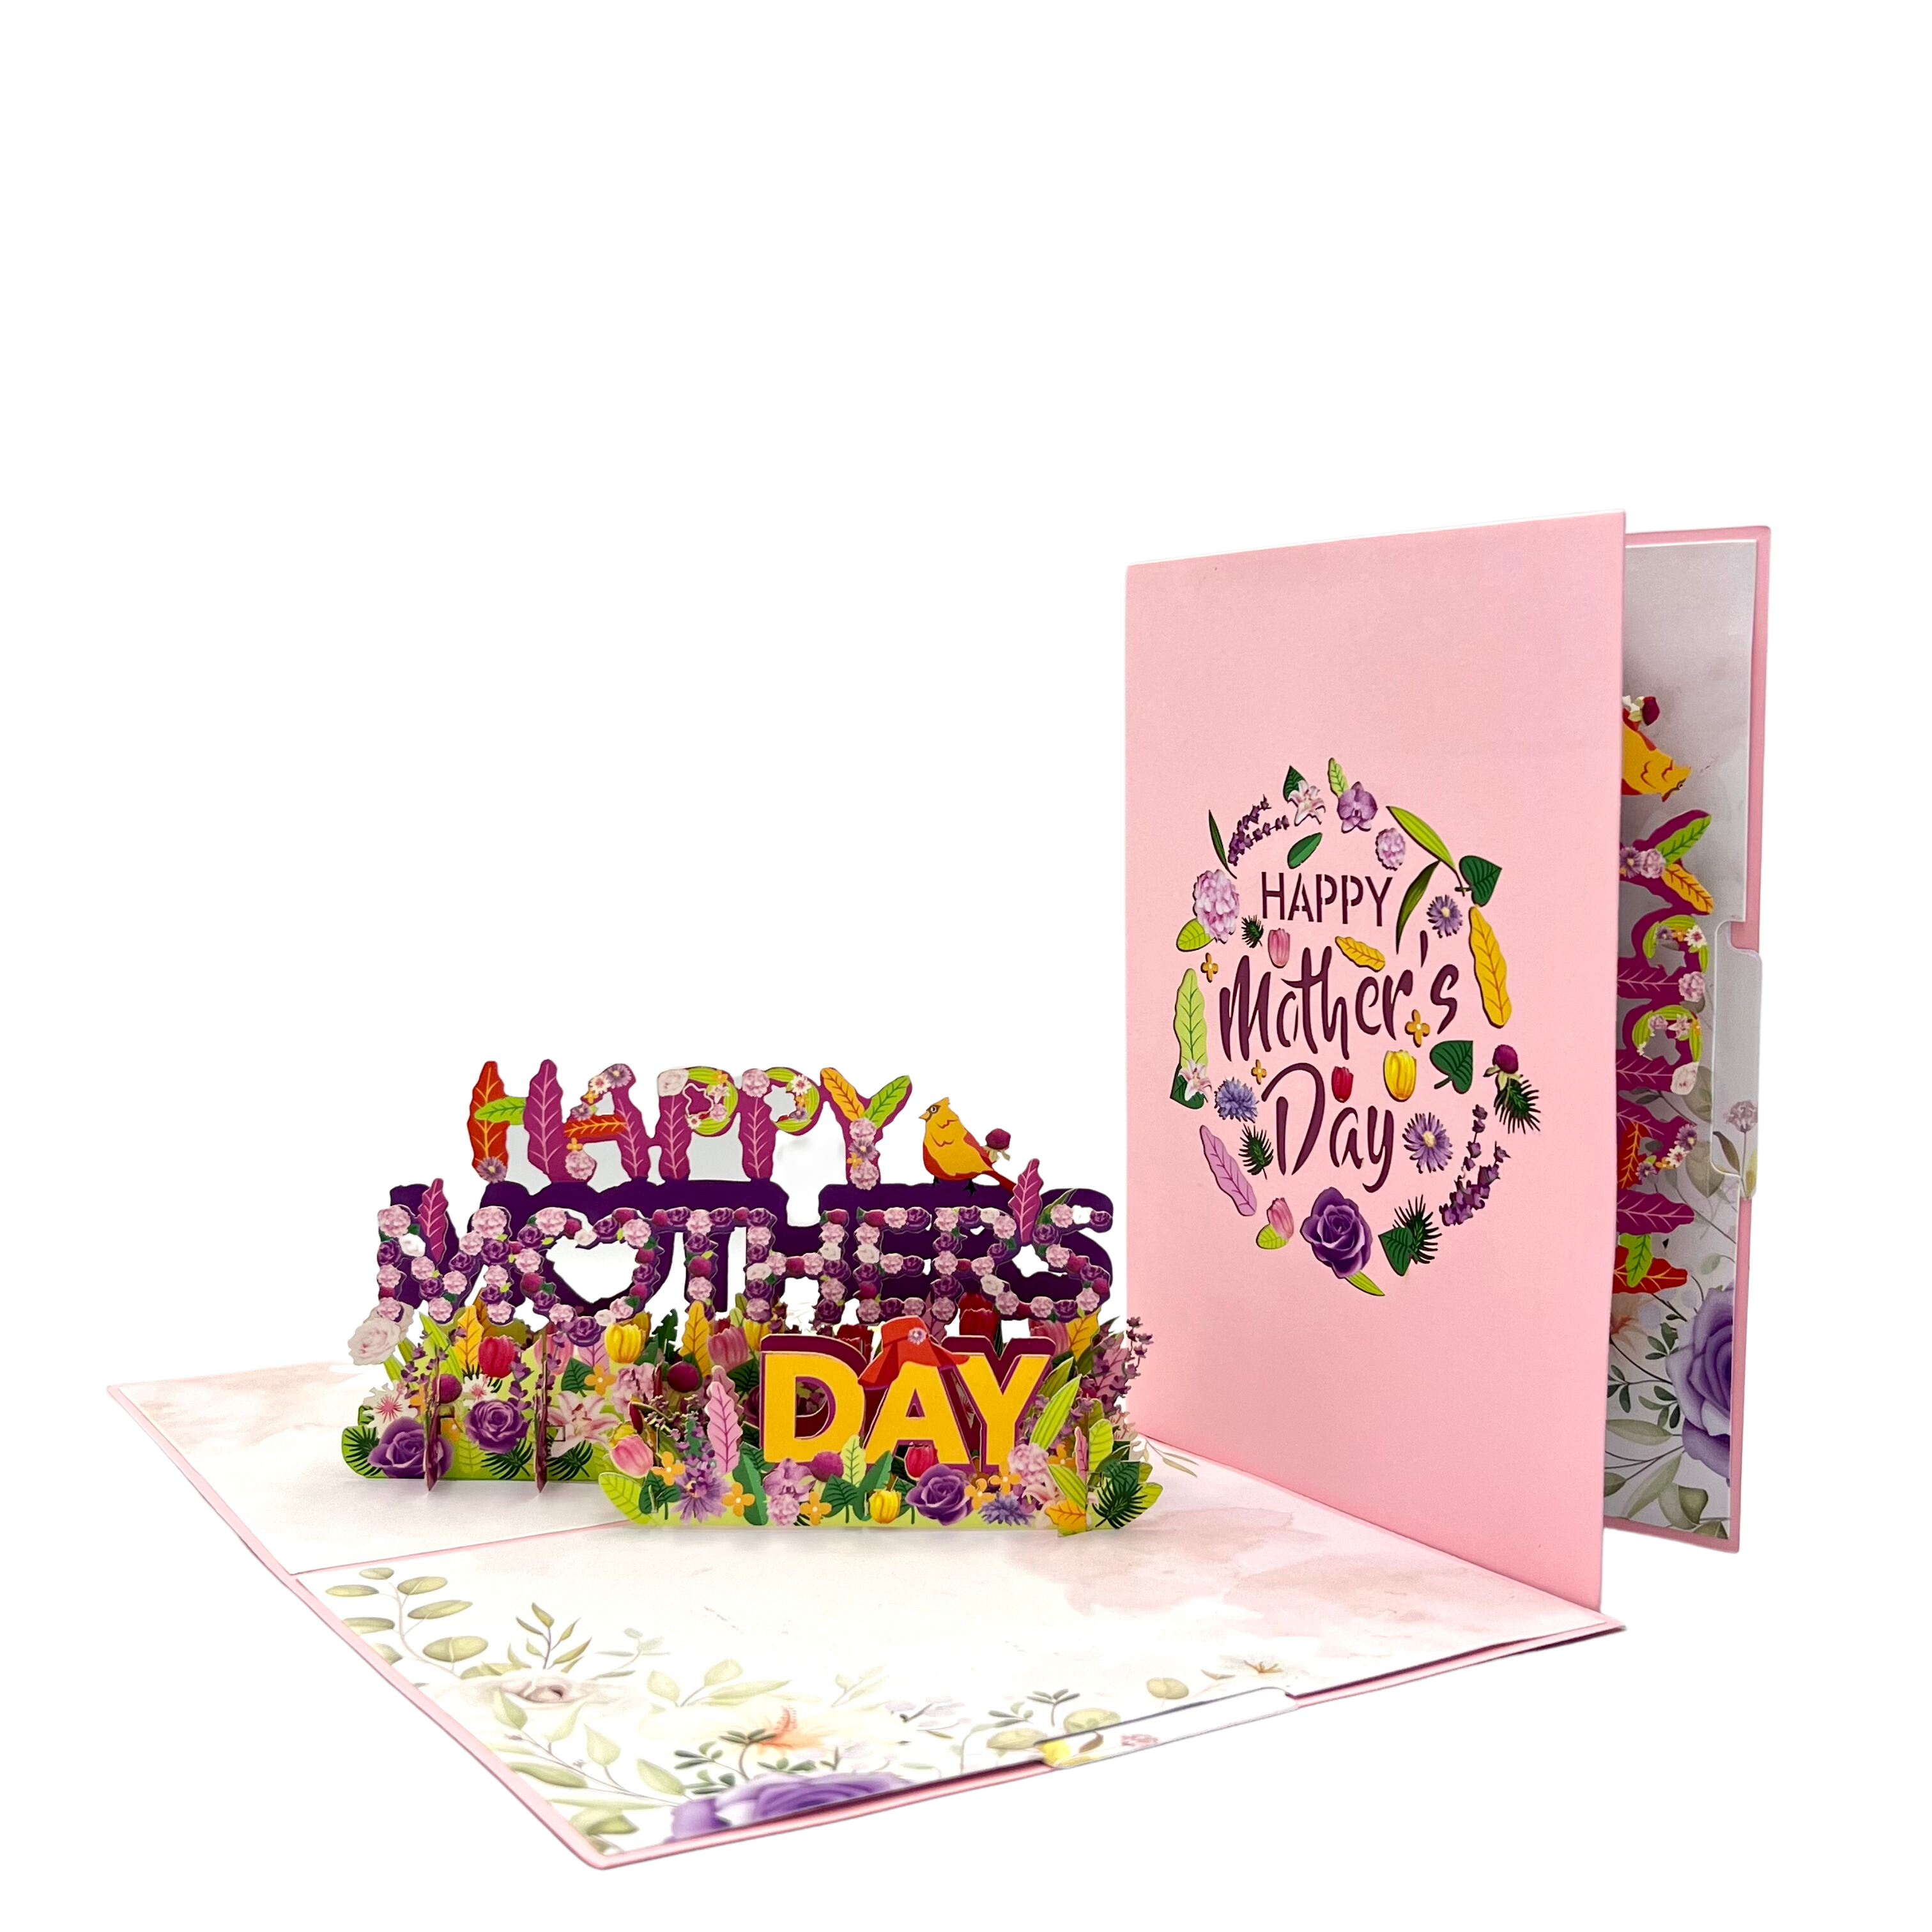 Pop Up Greeting Card Happy Mother's Day, Colorful Card, Flowers Card, Gift for Mom, Grandma Card, Mother's Day Card, Mom Card, Mother Gift